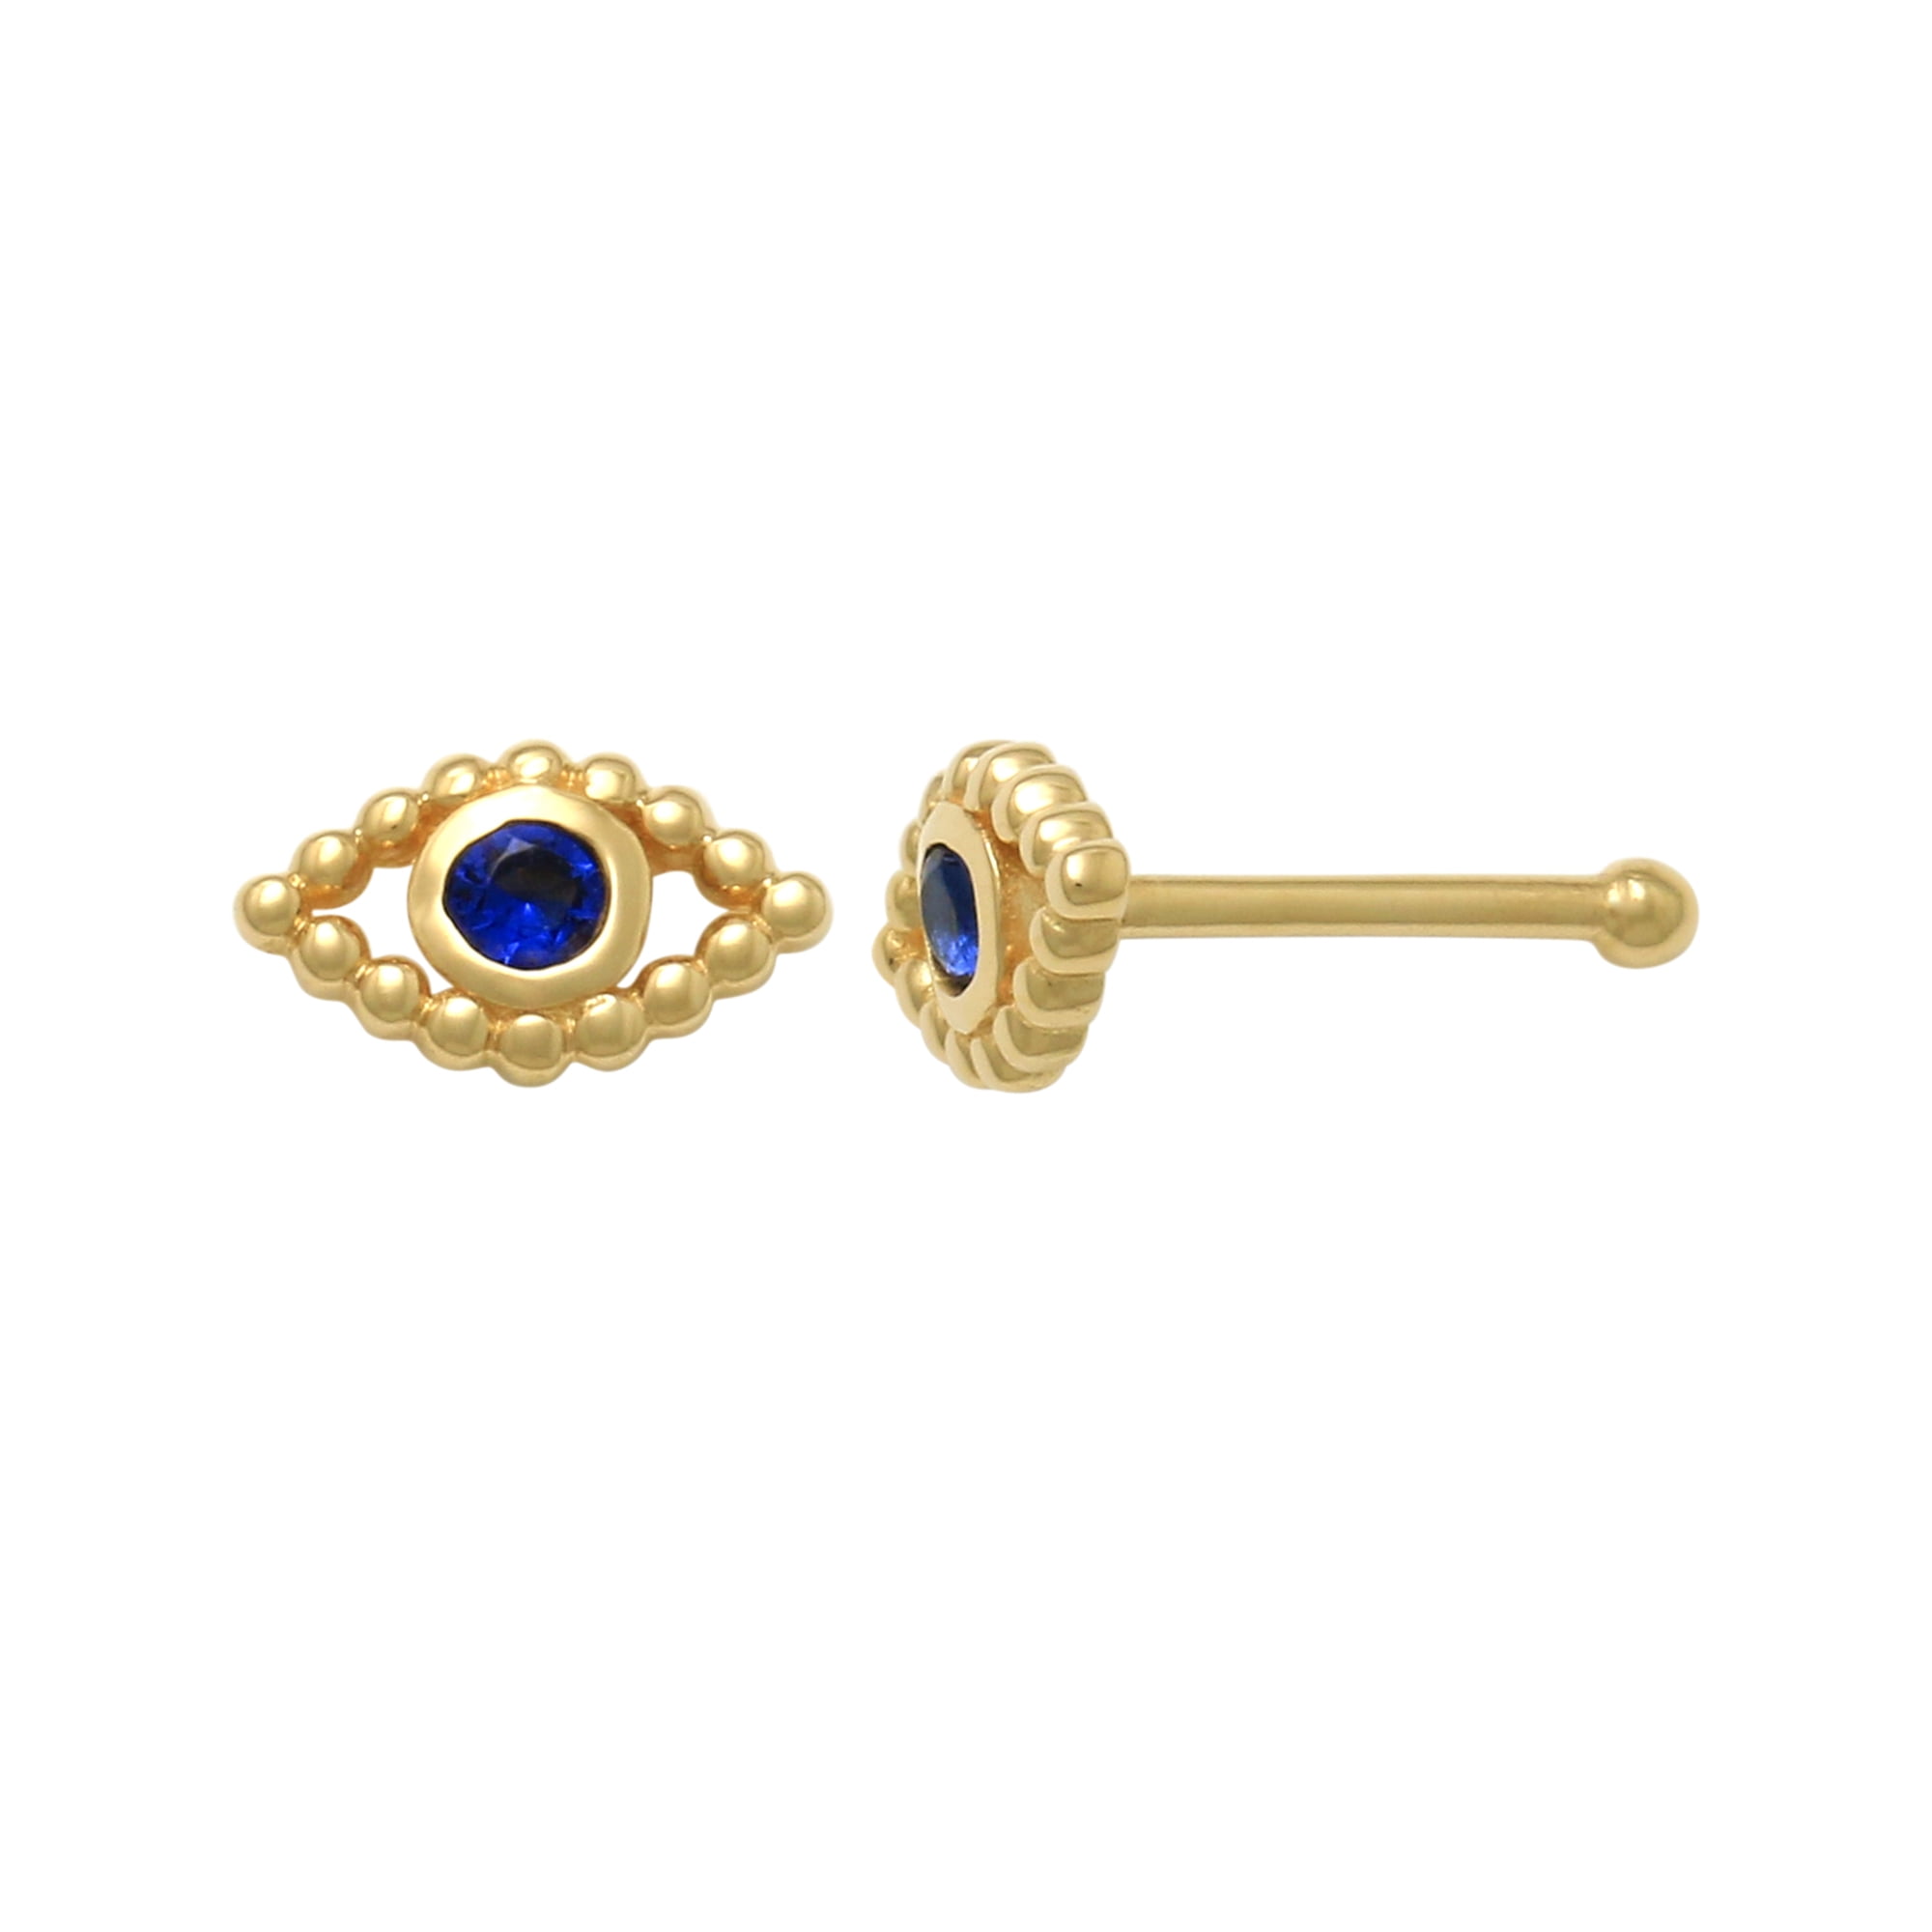 10K Solid Gold CZ Evil Eye Belly Button Ring - 14G 3/8